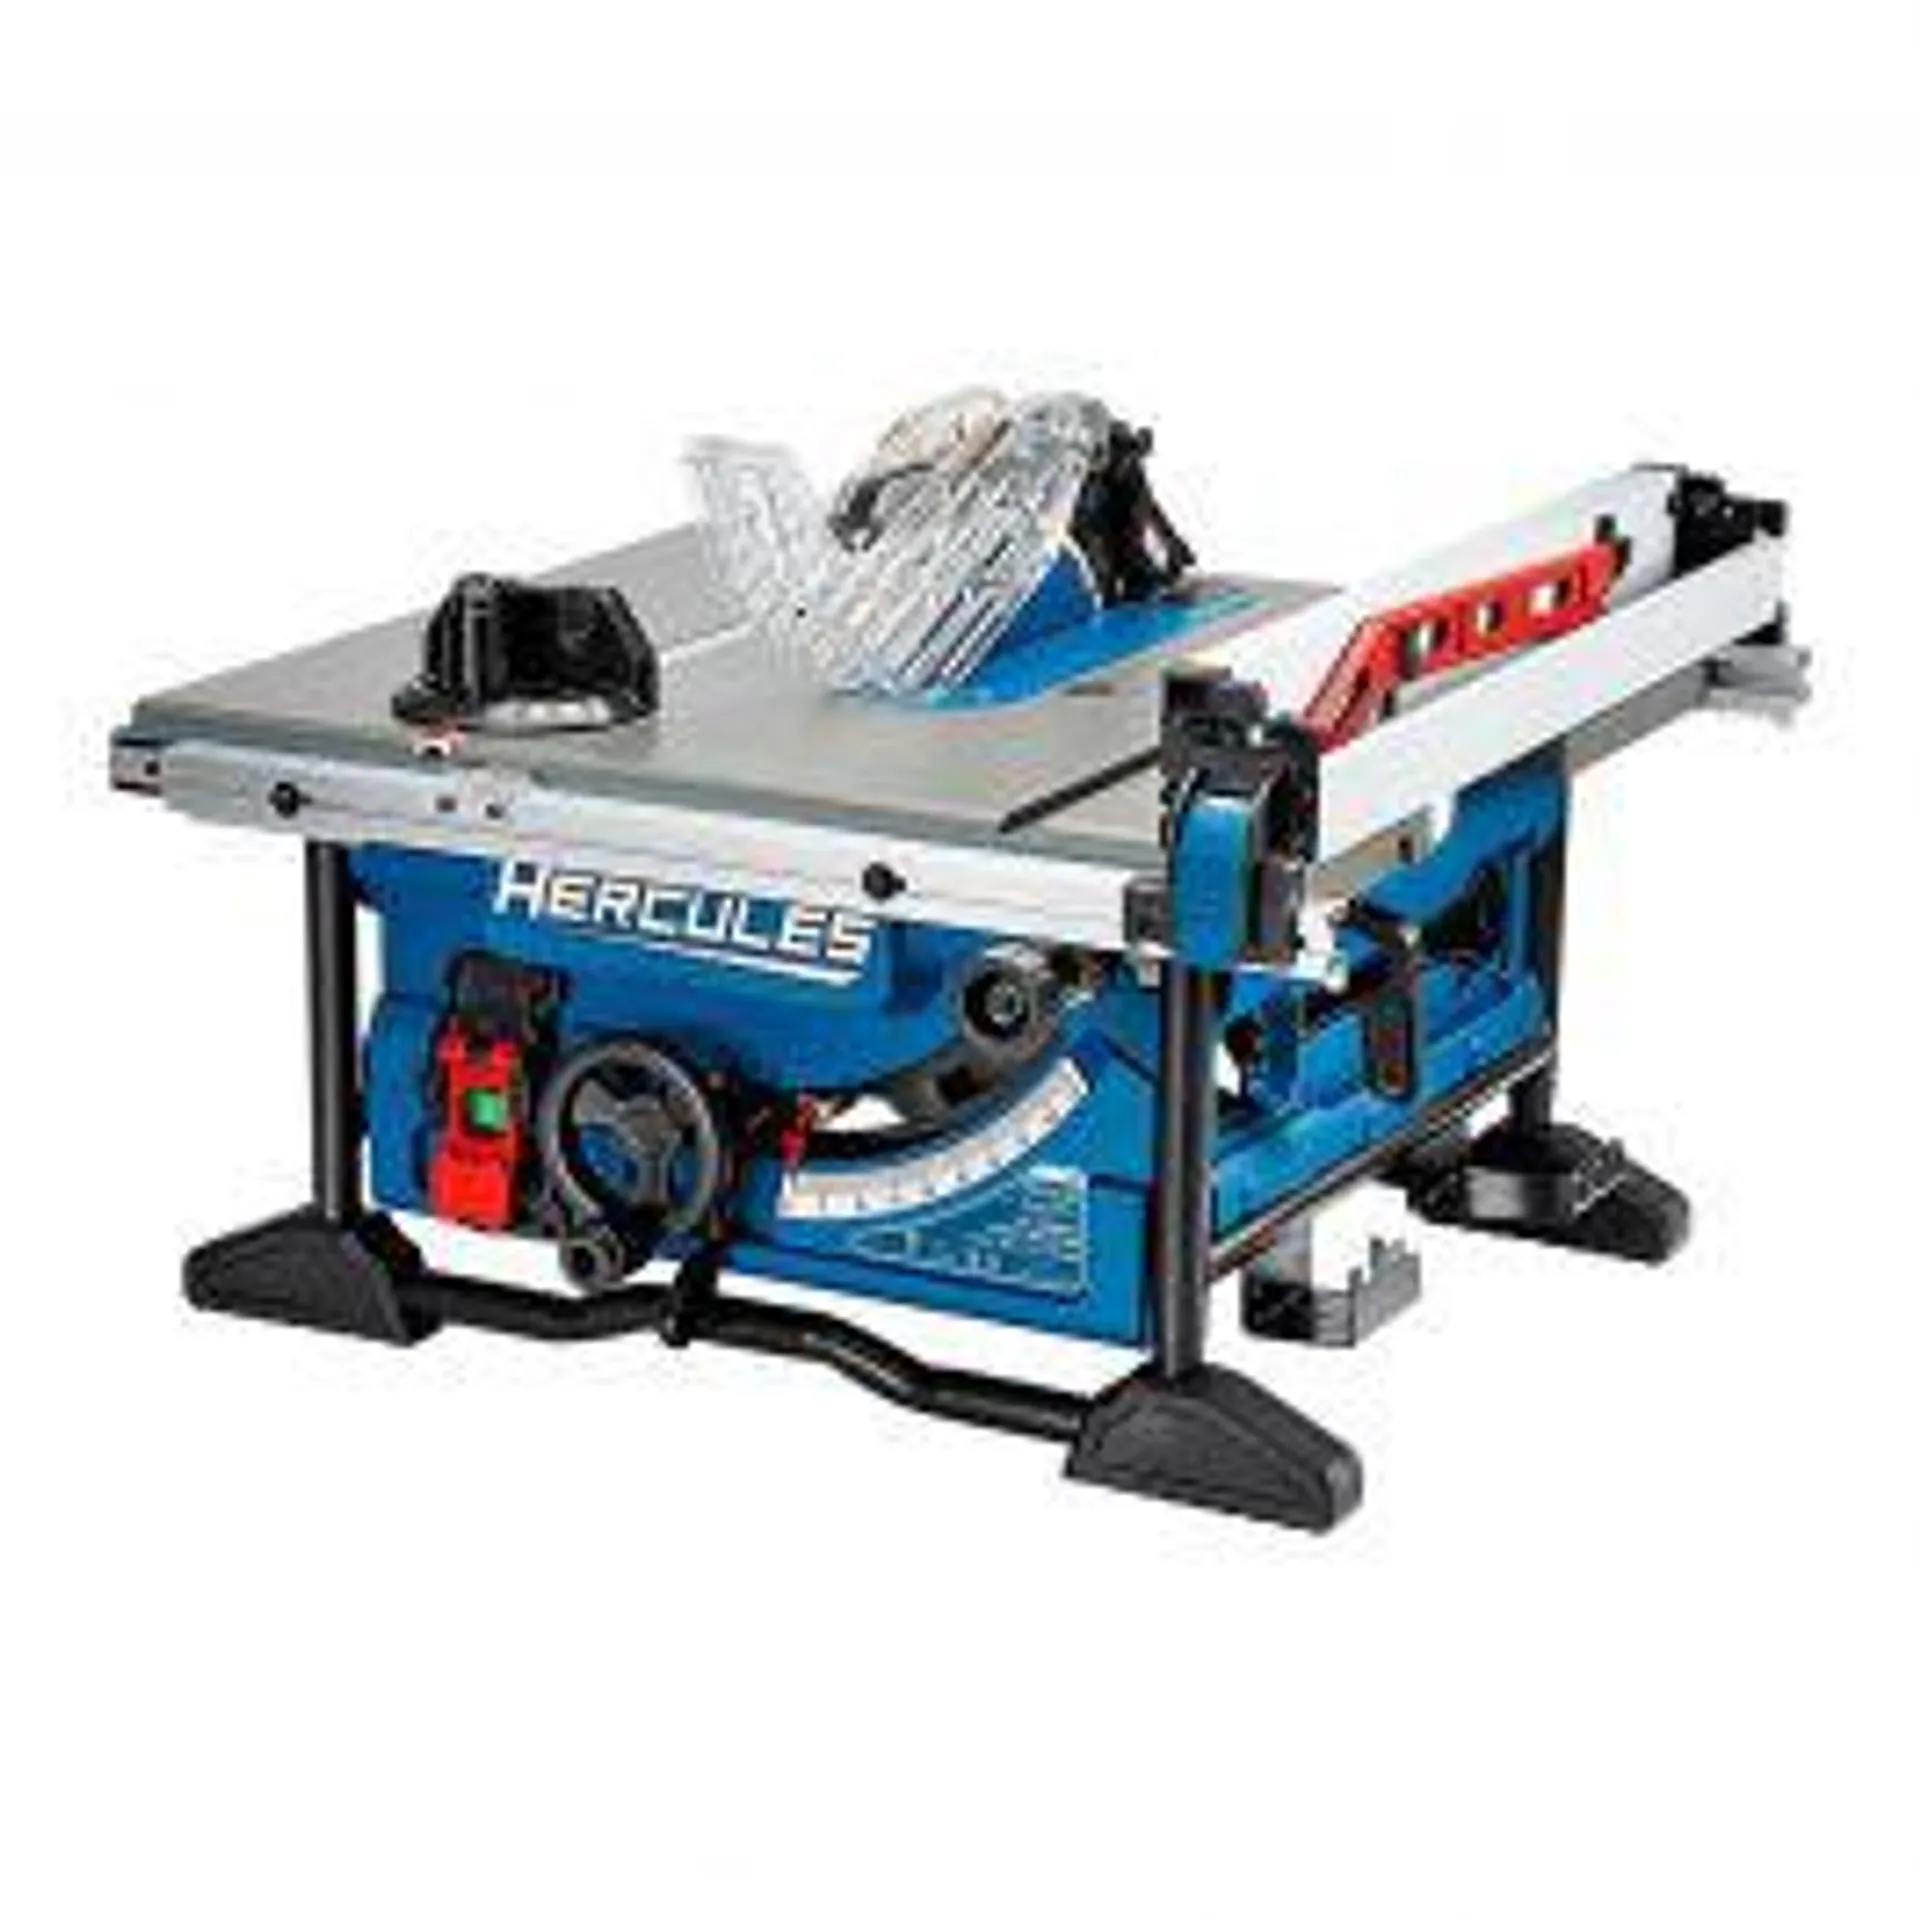 15 Amp, 10 in. Compact Jobsite Table Saw with Rack and Pinion Fence